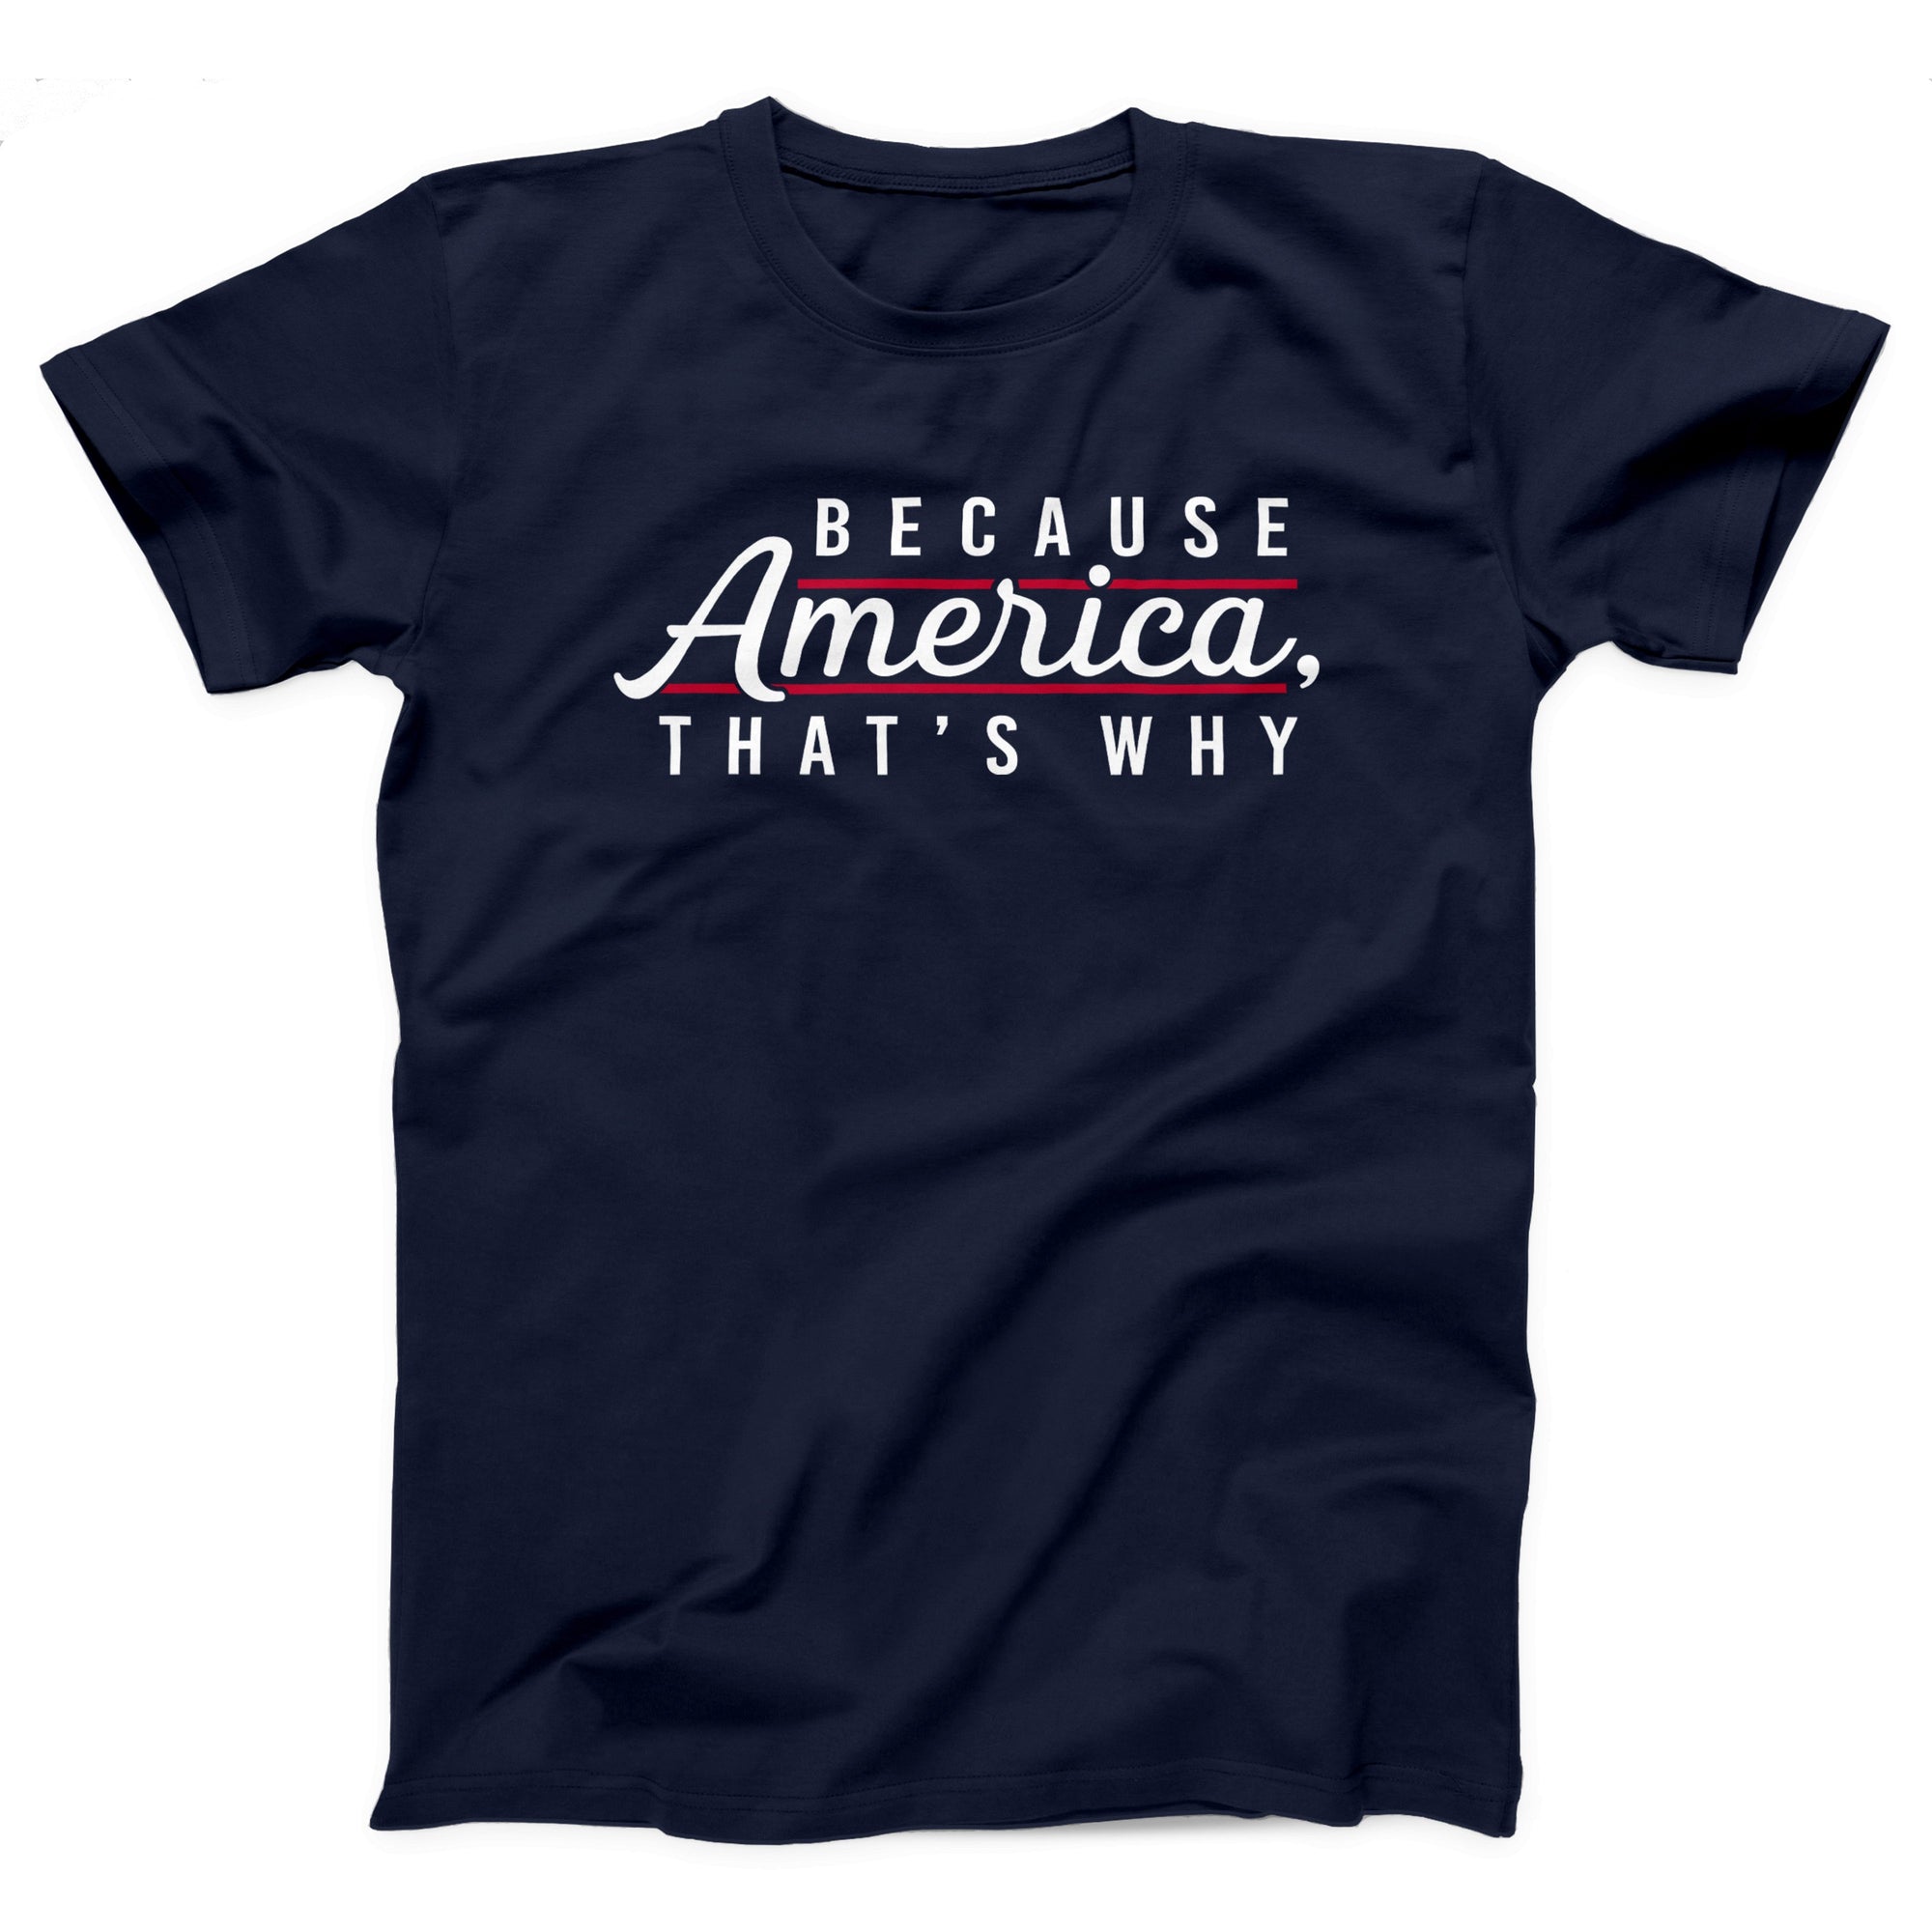 Because America, That's Why Adult Unisex T-Shirt - anishphilip